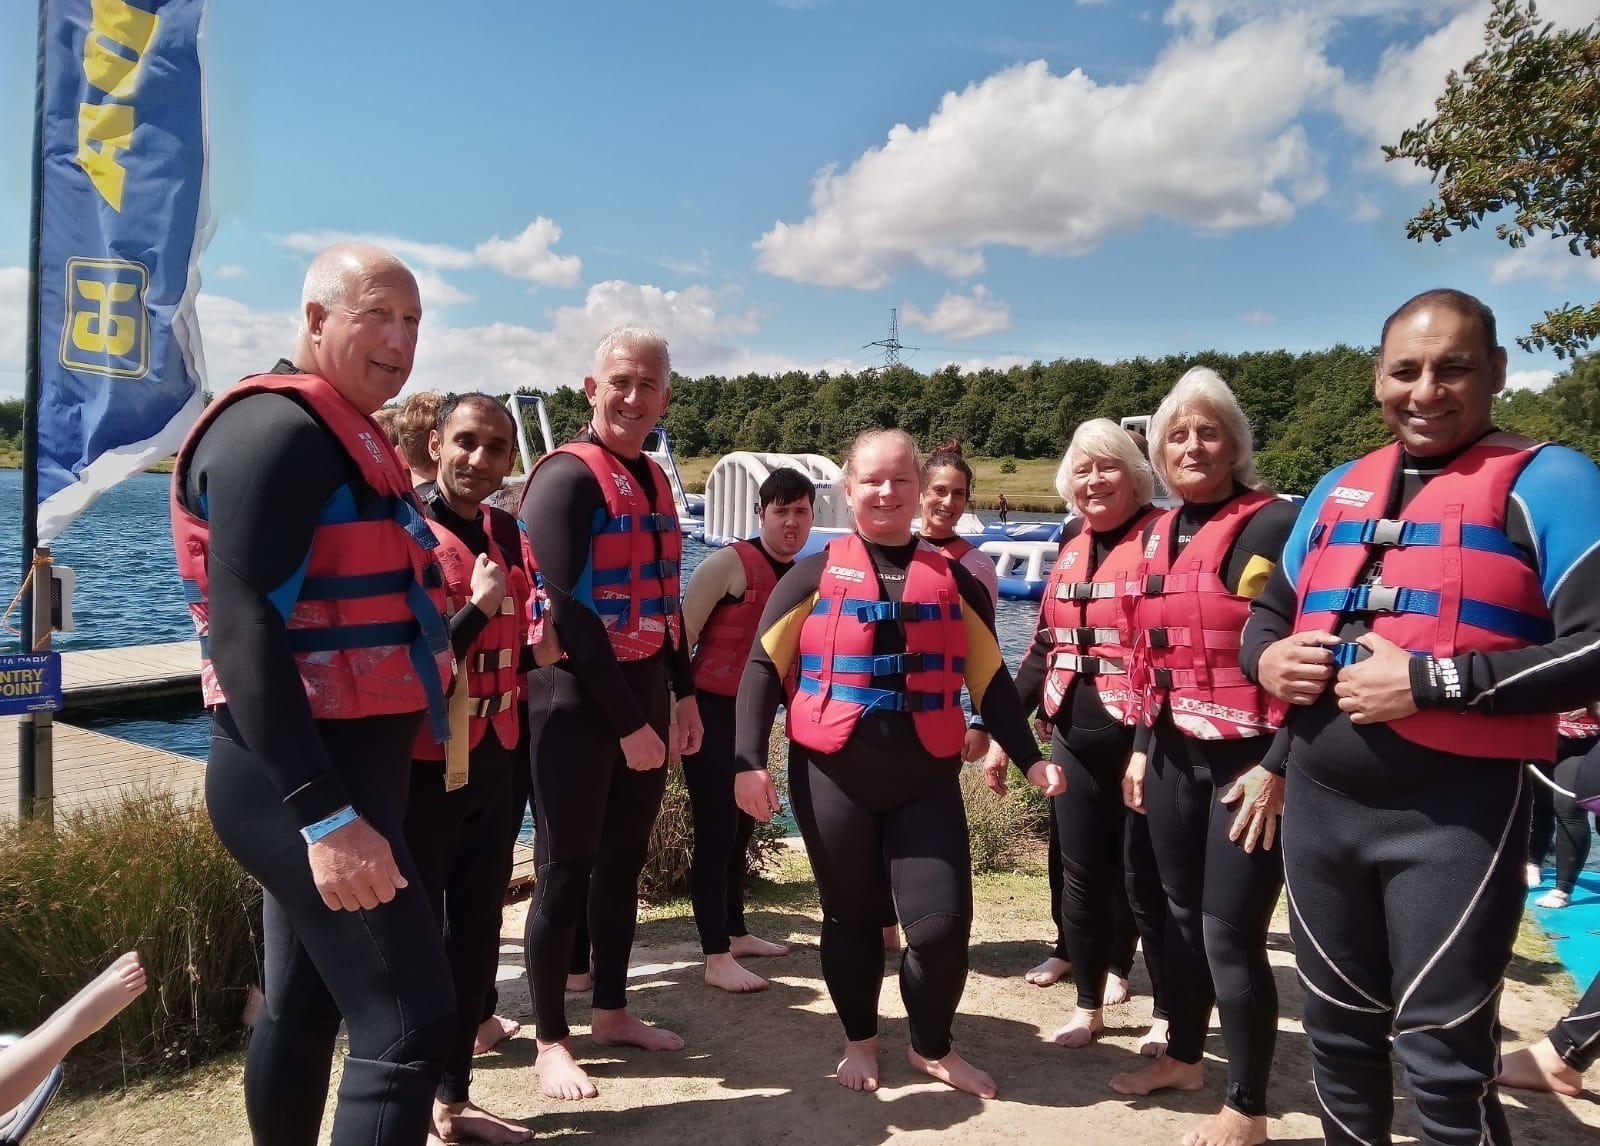 A group of people in life jackets standing in front of a lake